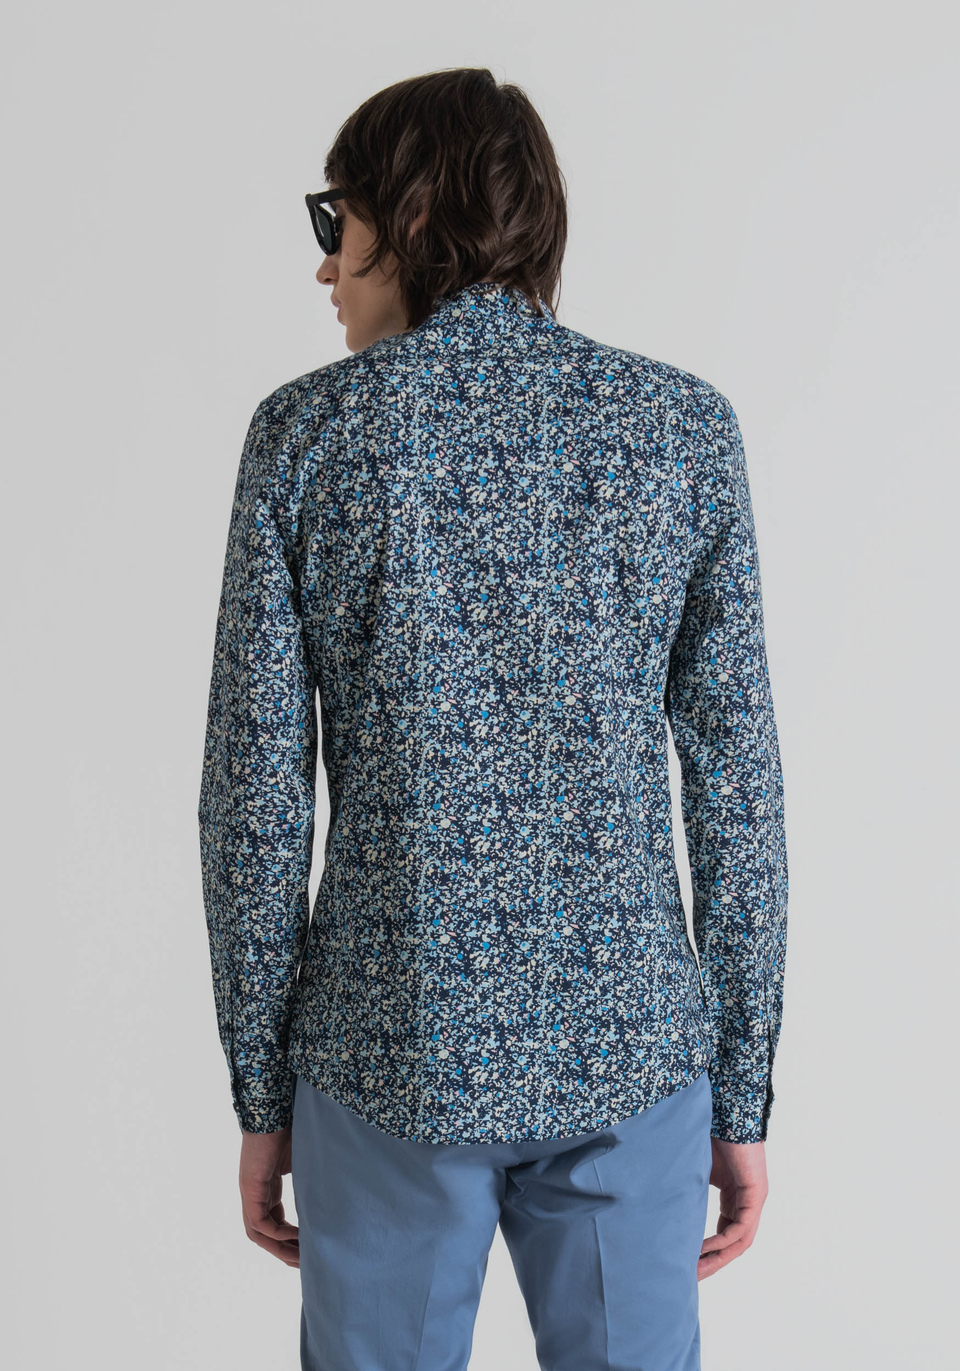 "SEUL" SLIM-FIT SHIRT IN SOFT-TOUCH COTTON WITH MICROPATTERN - Antony Morato Online Shop